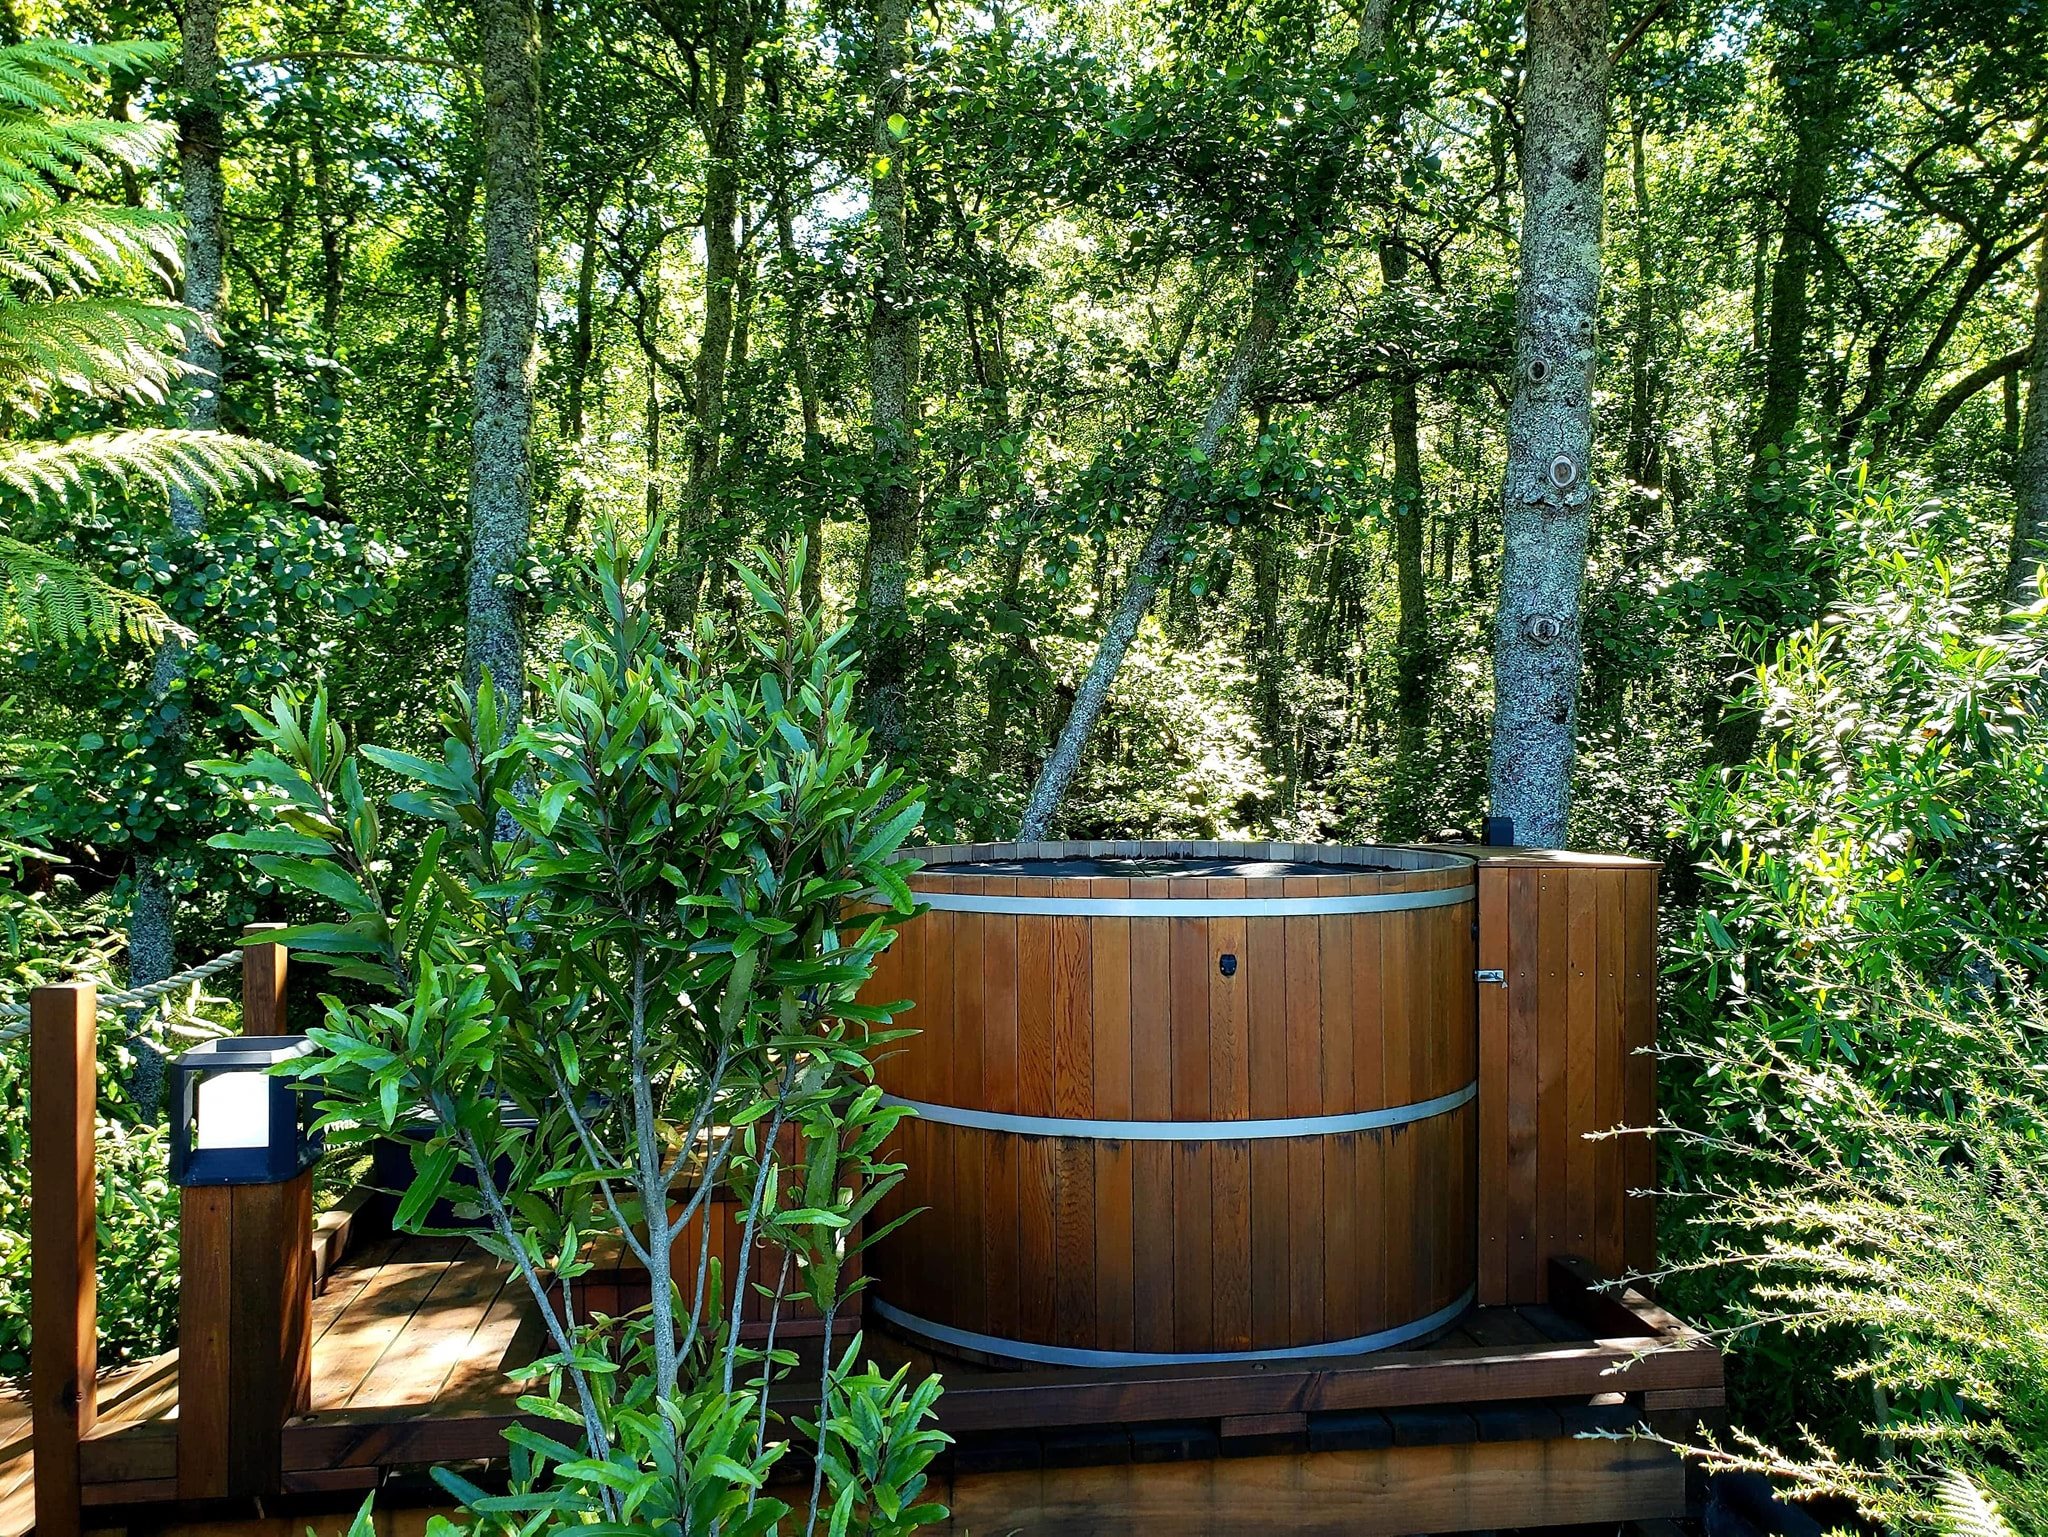 A hot tub in the middle of the forest